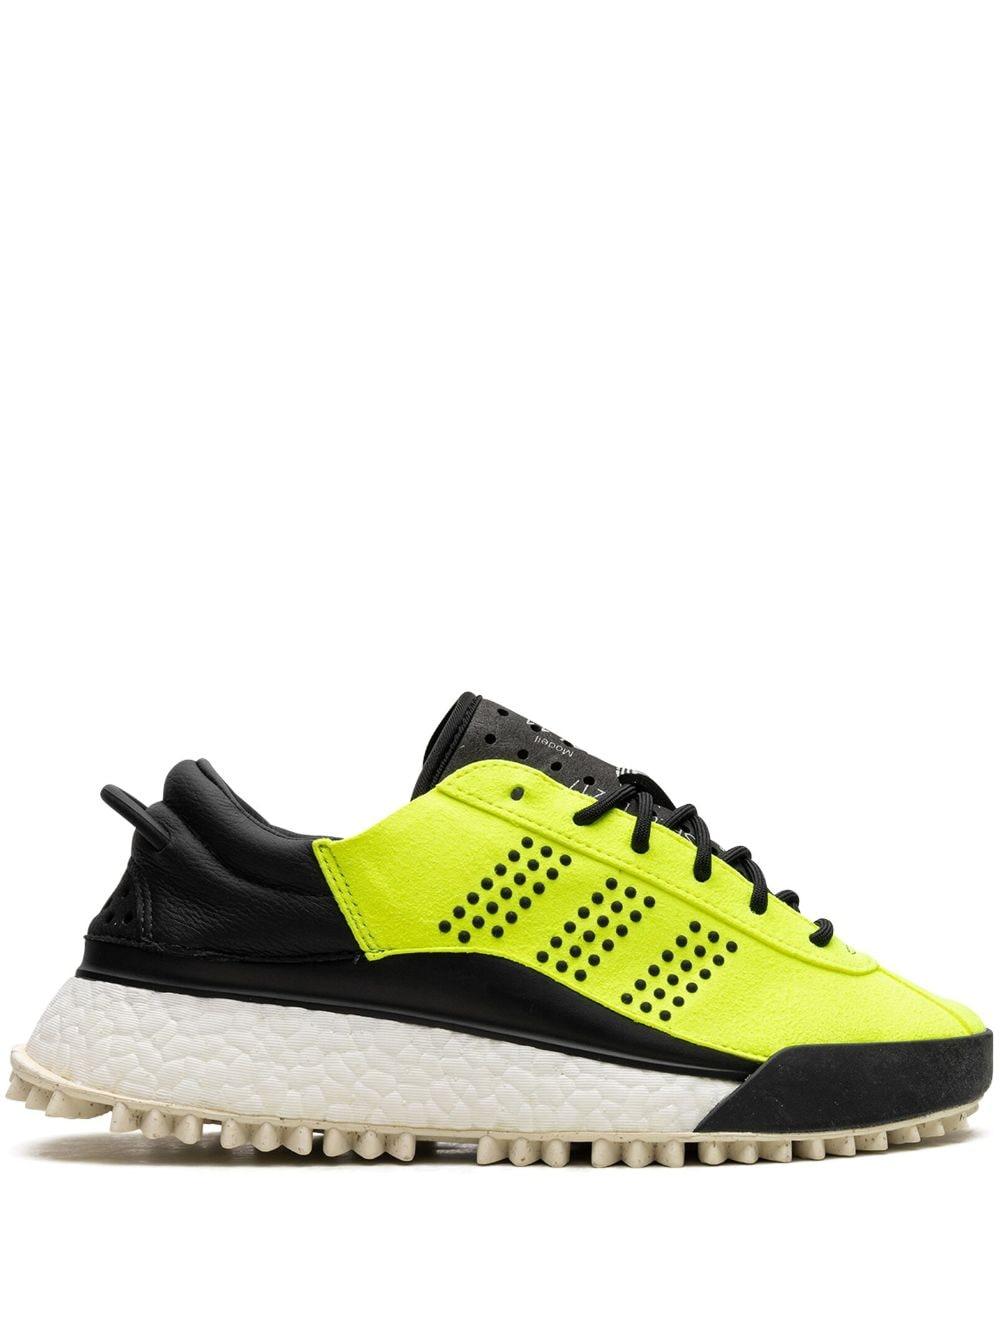 adidas X Alexander Wang Hike Lo Sneakers in Yellow for Men | Lyst